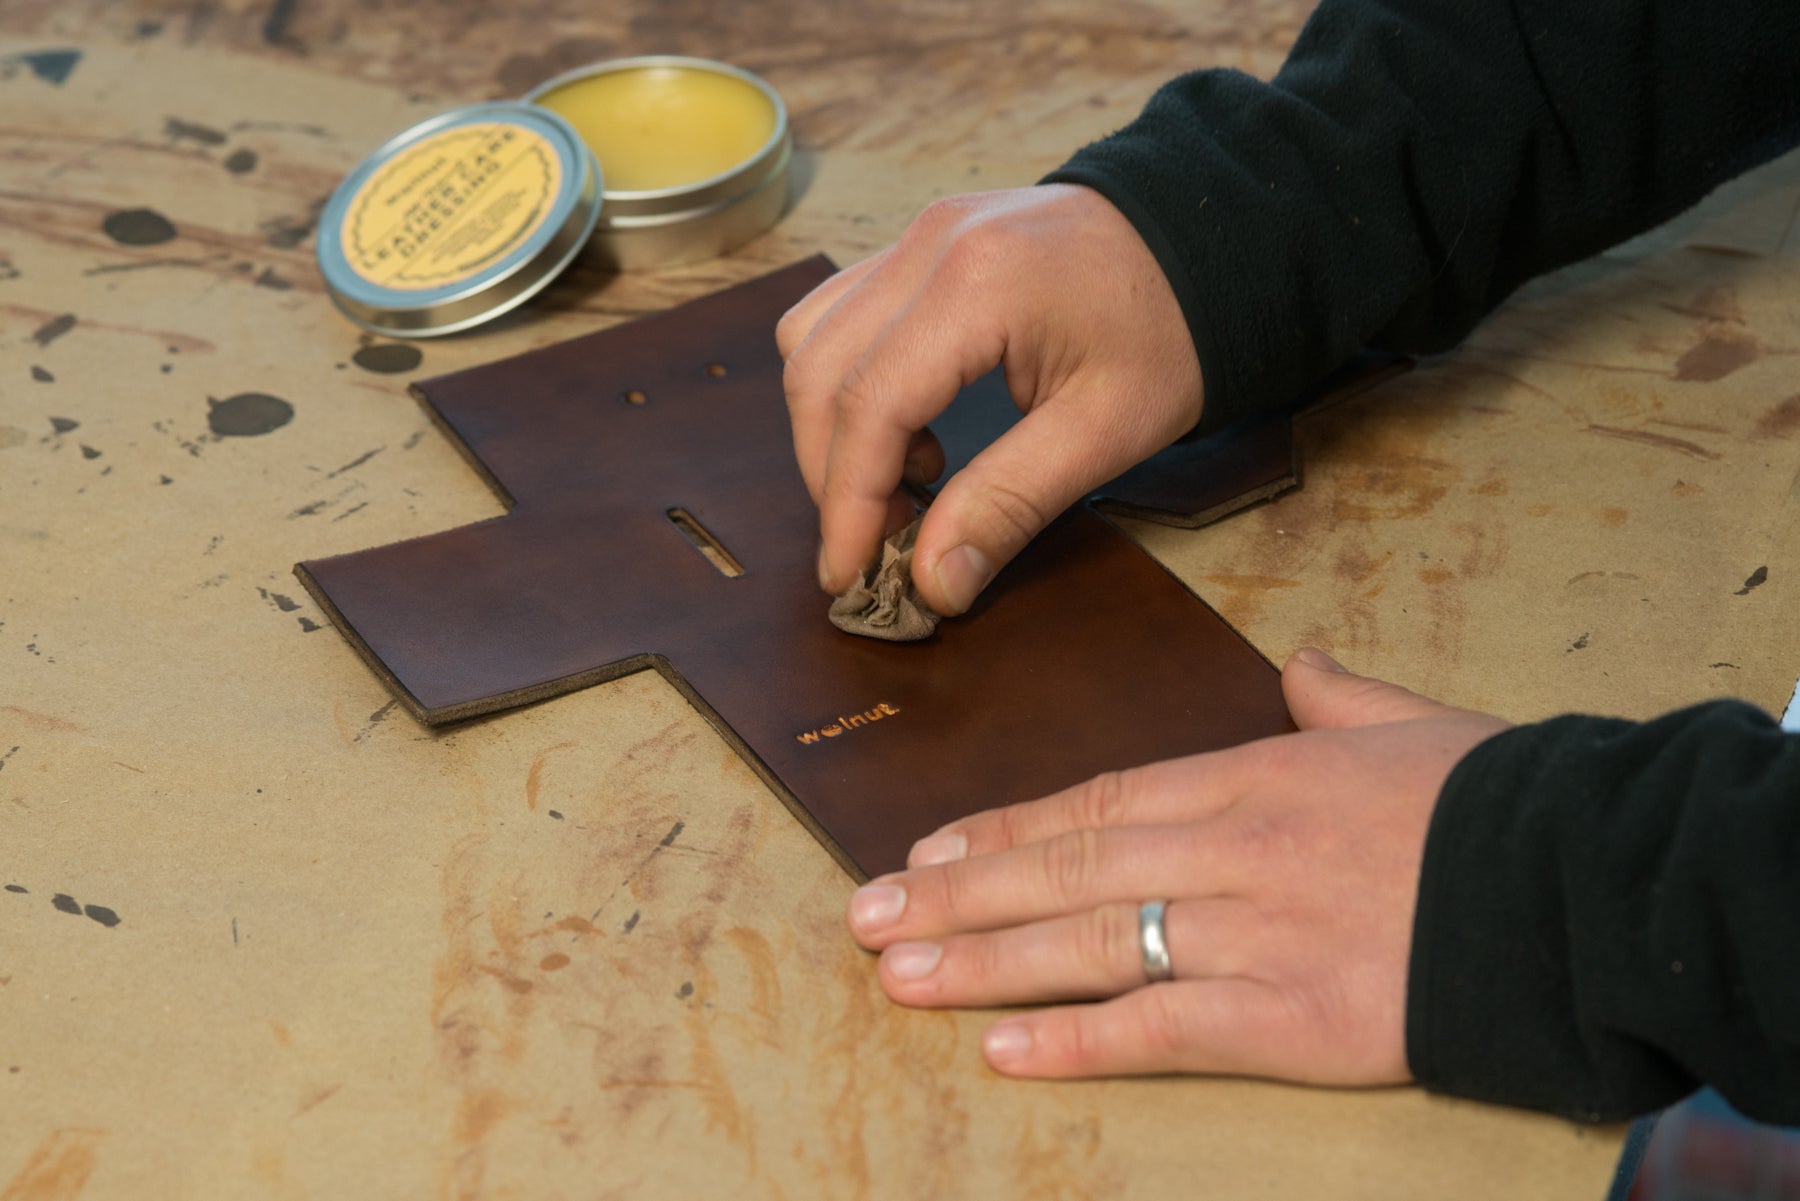 How to darken vegetable-tanned leather easily